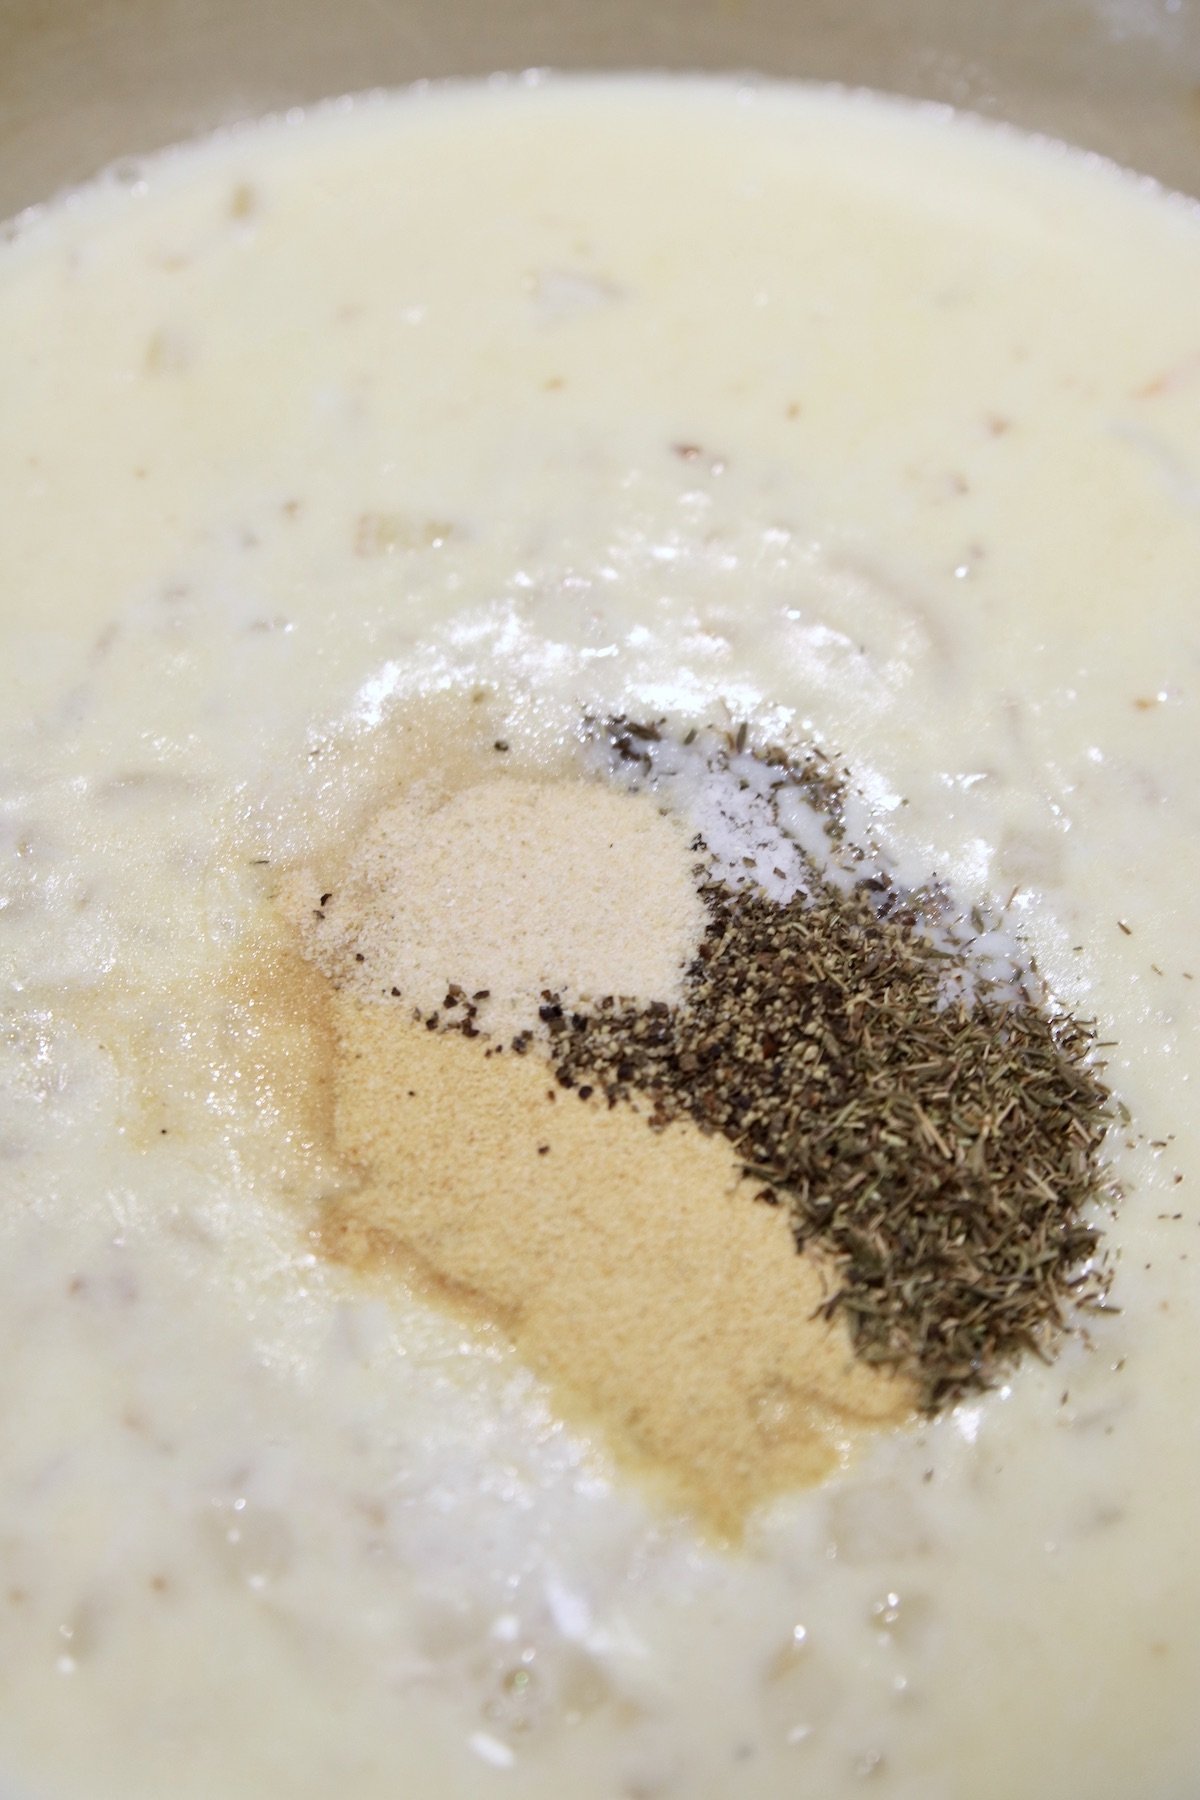 spices added to creamy sauce in a pan